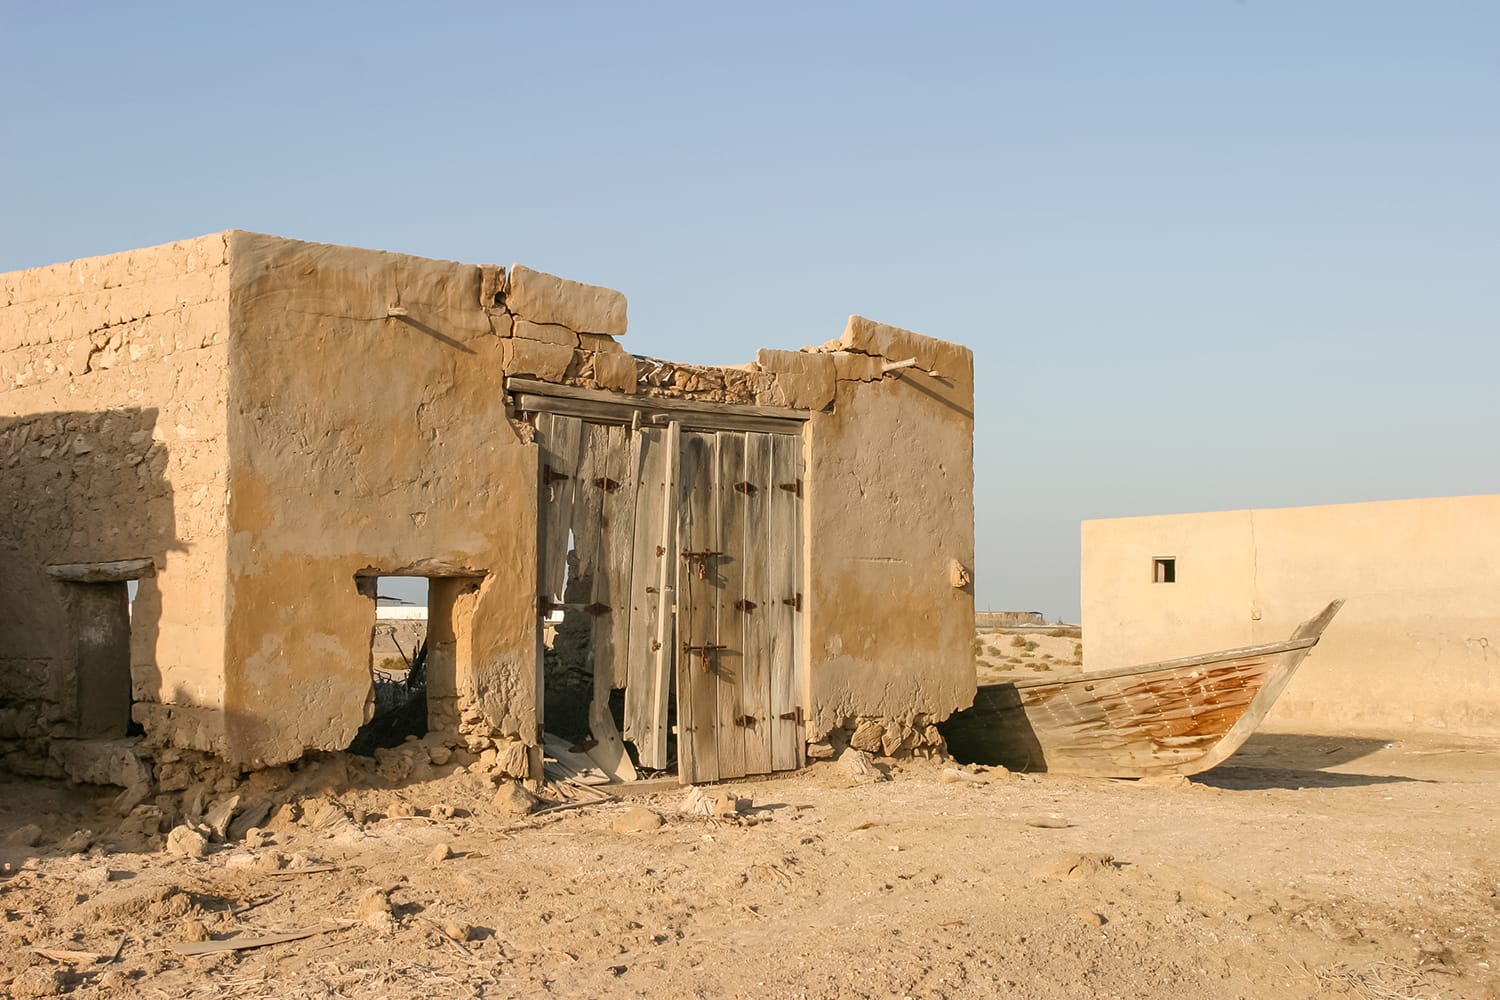 An old shed and fishing boat in Al Jazirat Al Hamra